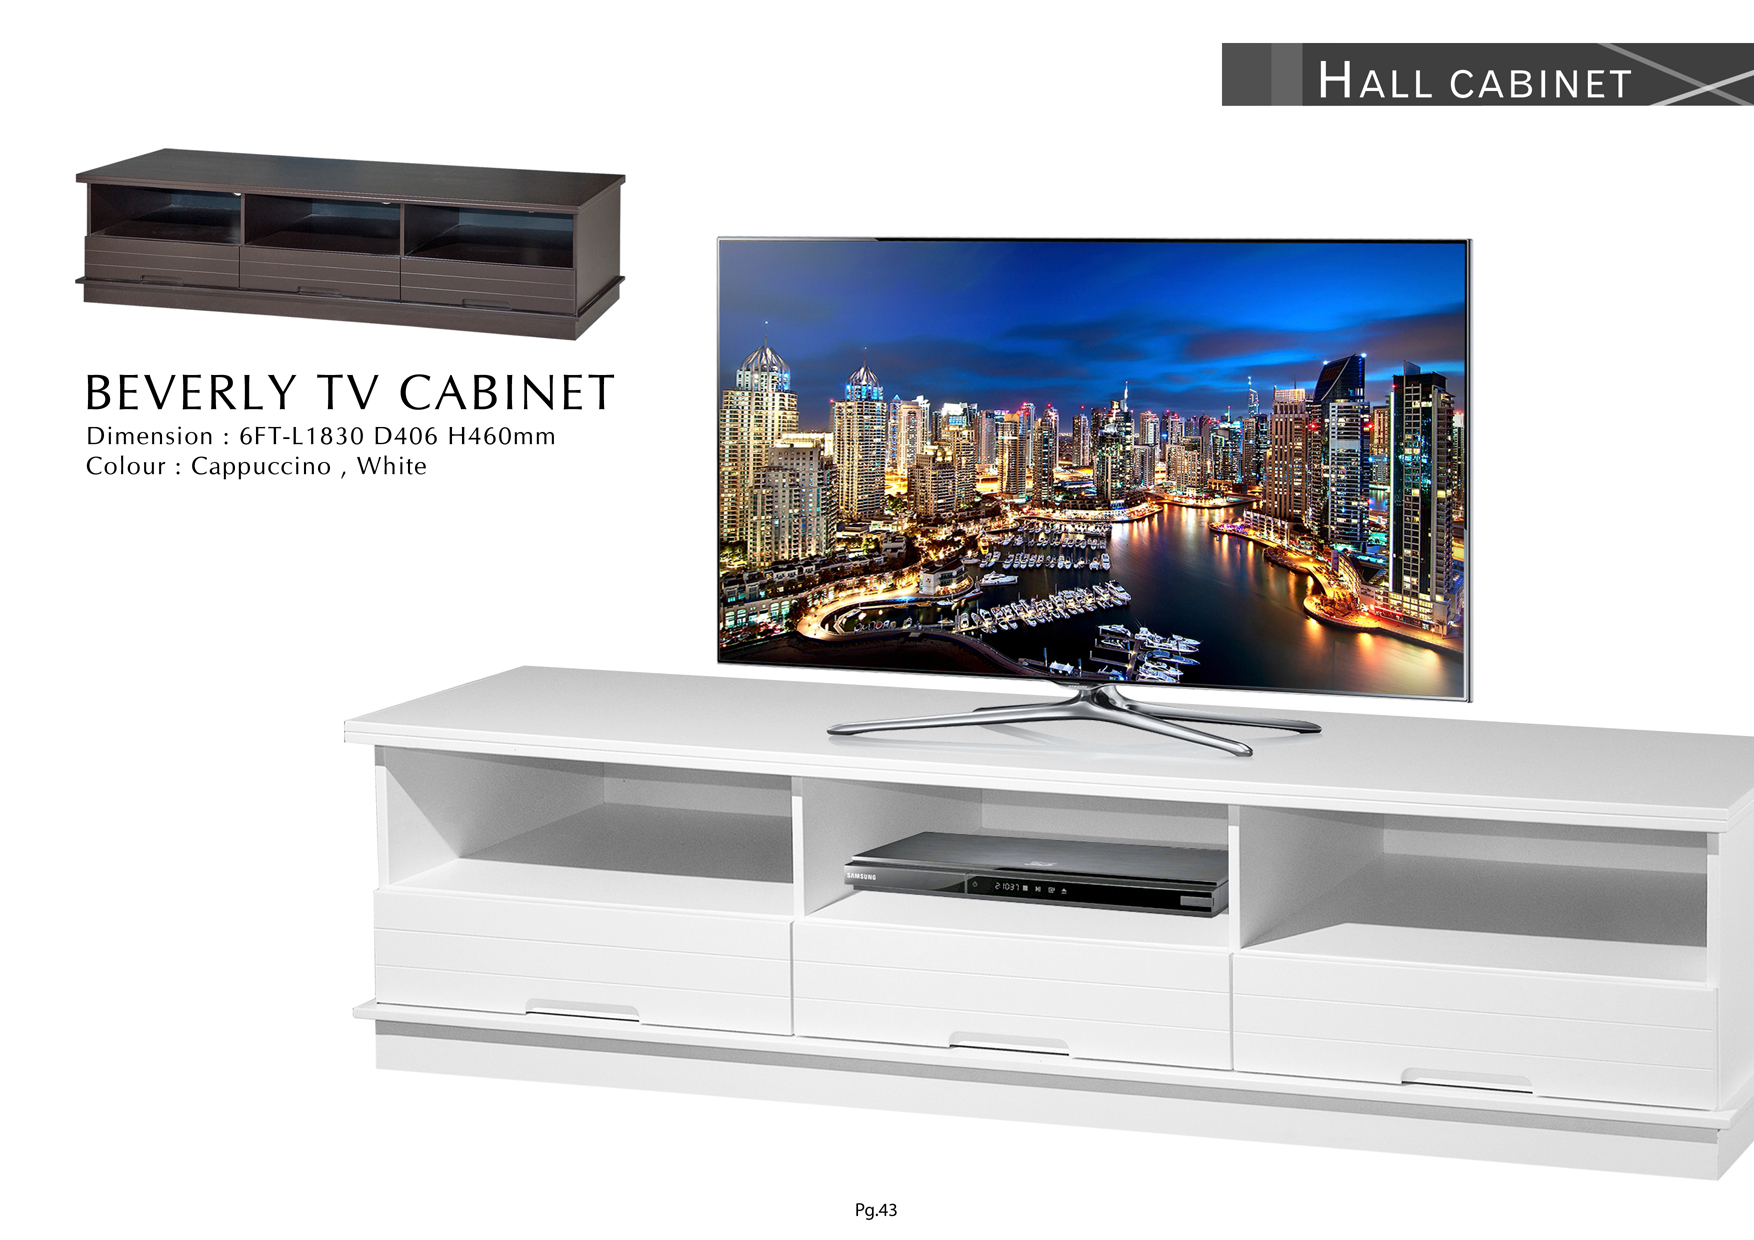 Product: PG43. BEVERLY TV CABINET